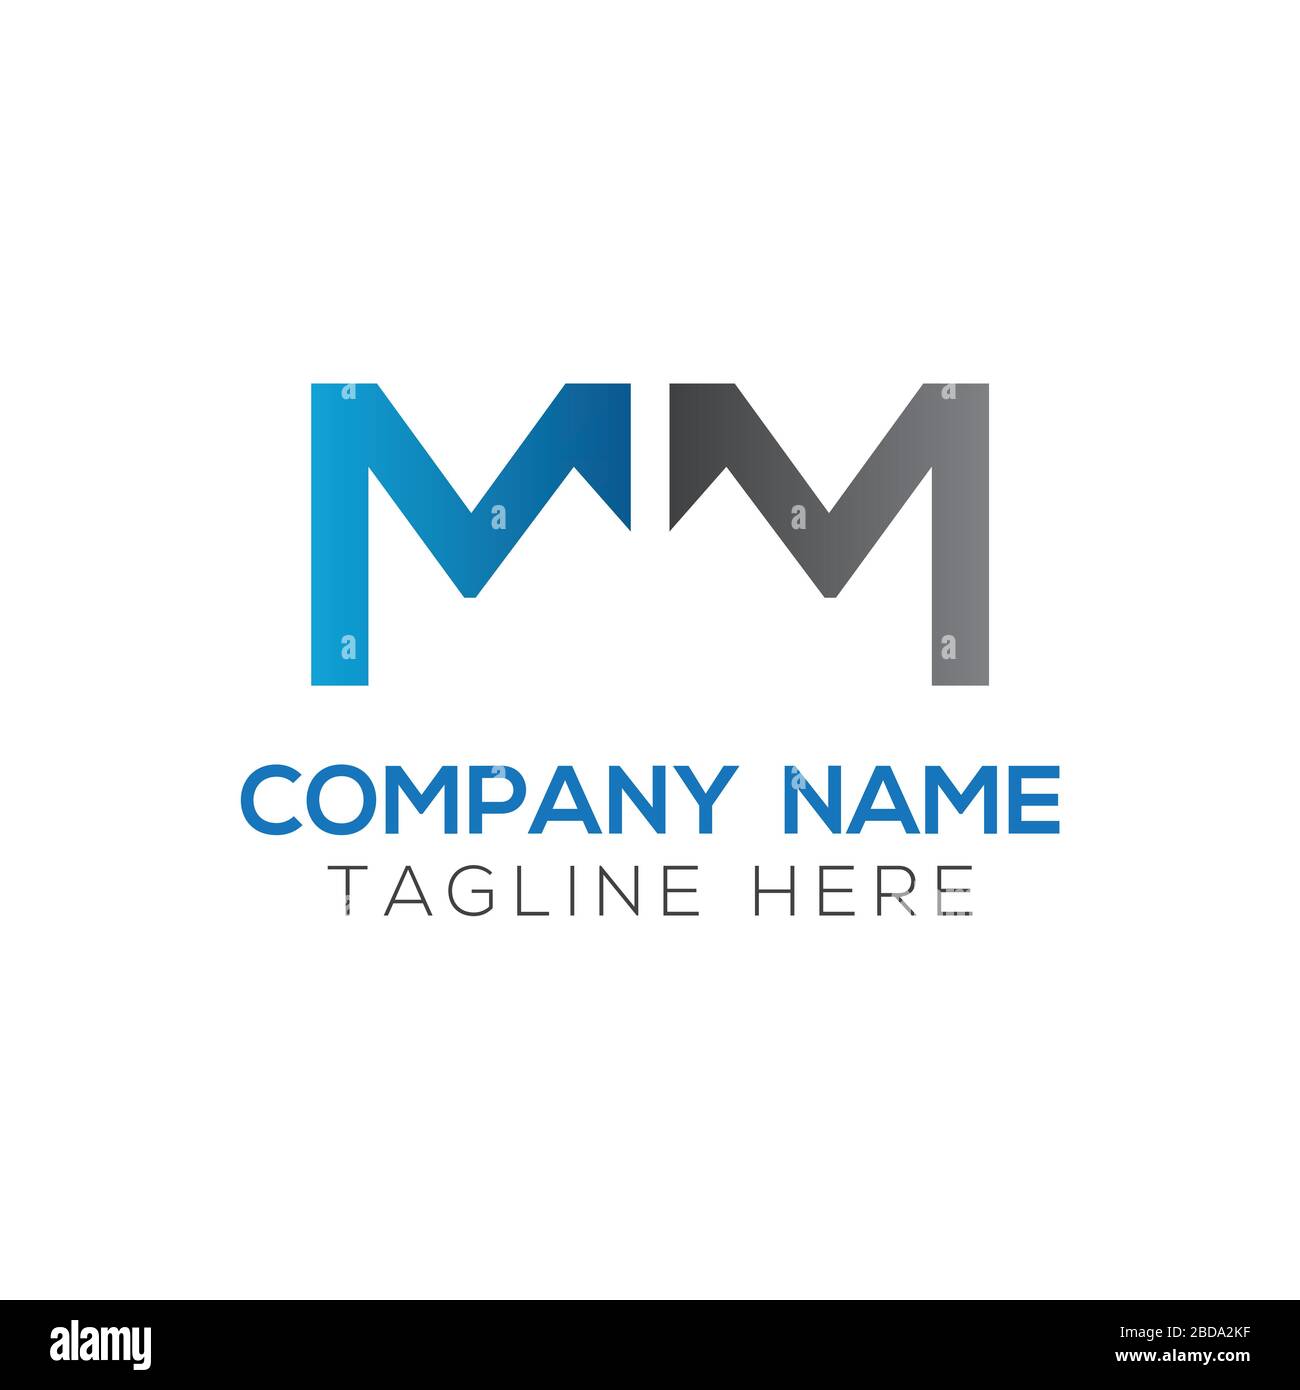 Premium Vector  Simple mm monogram logo suitable for any business with m  or mm initial